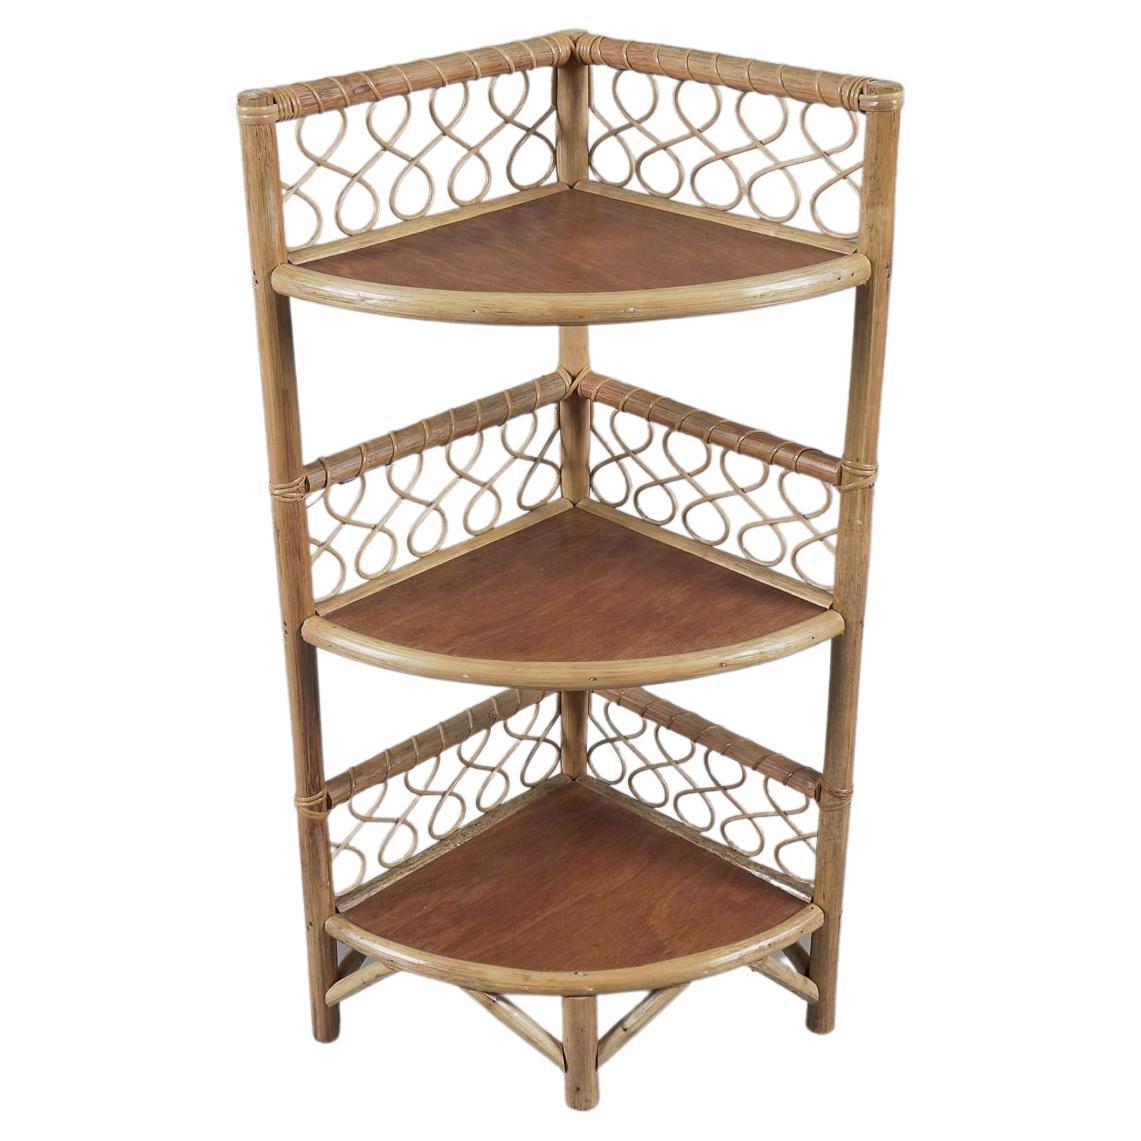 Lovely Corner Bamboo and Wicker Shelf, Italy, 1950s For Sale